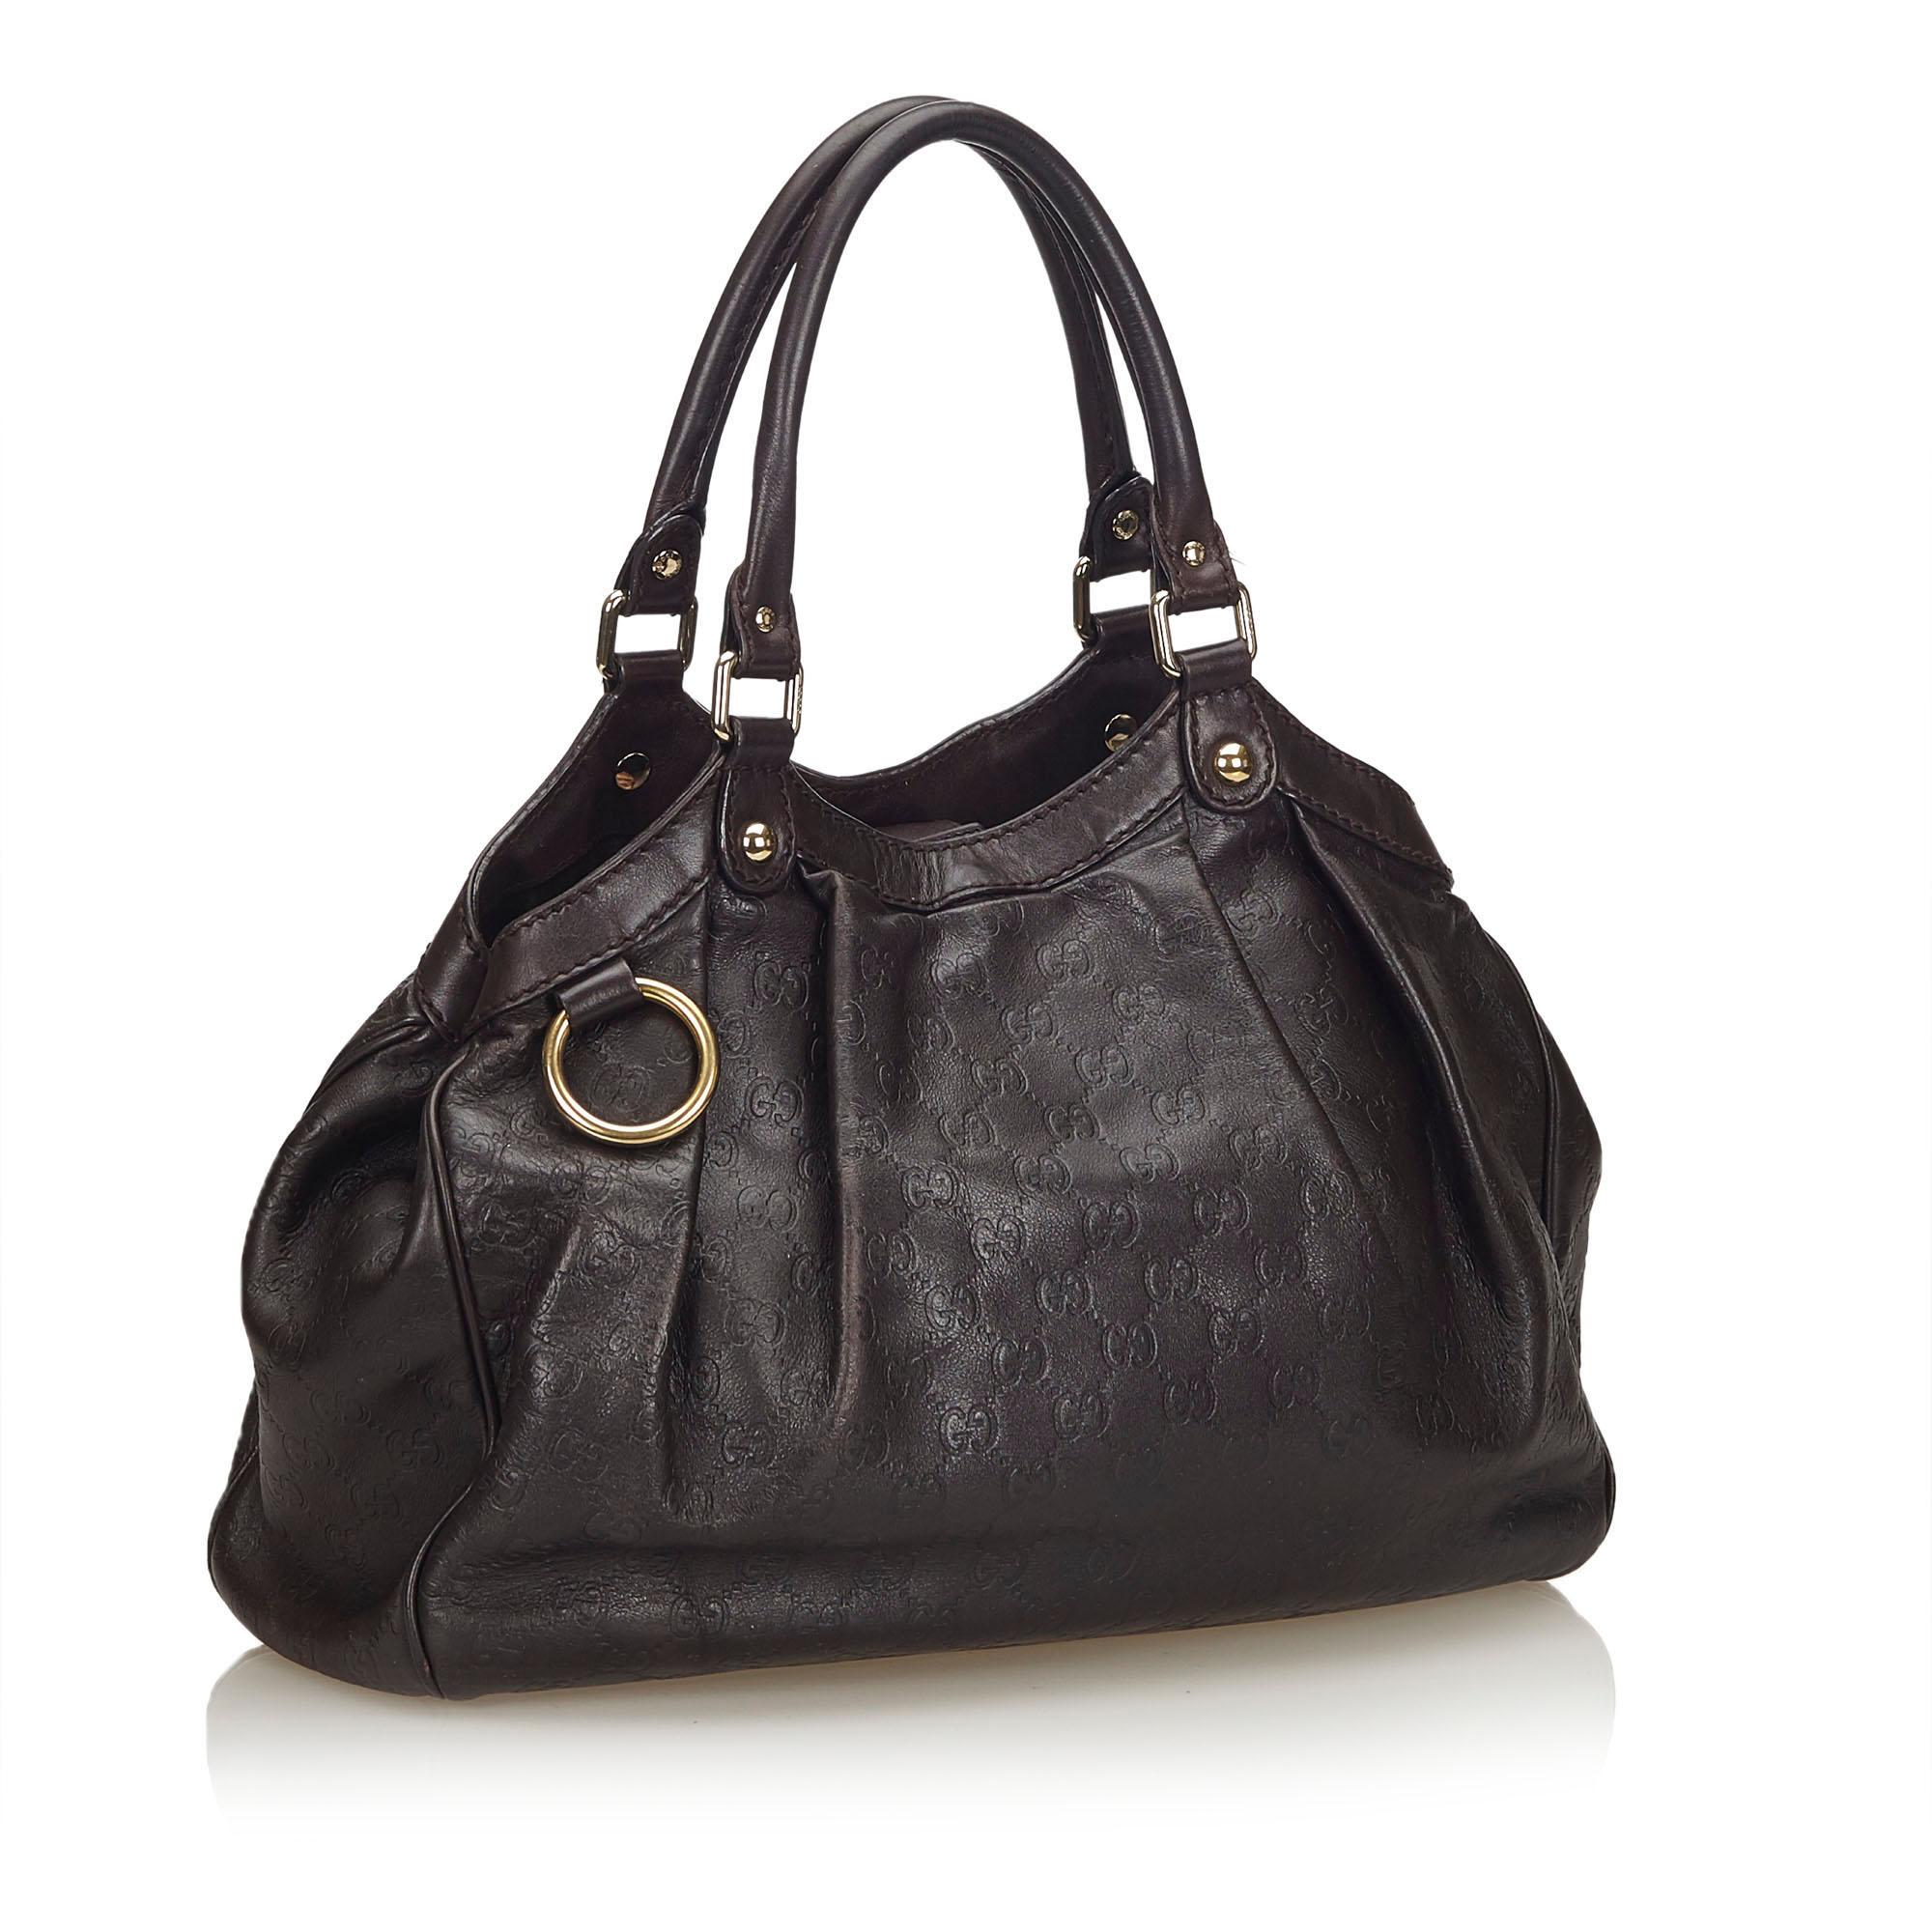 The Sukey features a leather body, rolled leather handles, a top button clasp closure, and an interior zip pocket. It carries as AB condition rating.

Inclusions: 
This item does not come with inclusions.

Dimensions:
Length: 30.00 cm
Width: 33.00